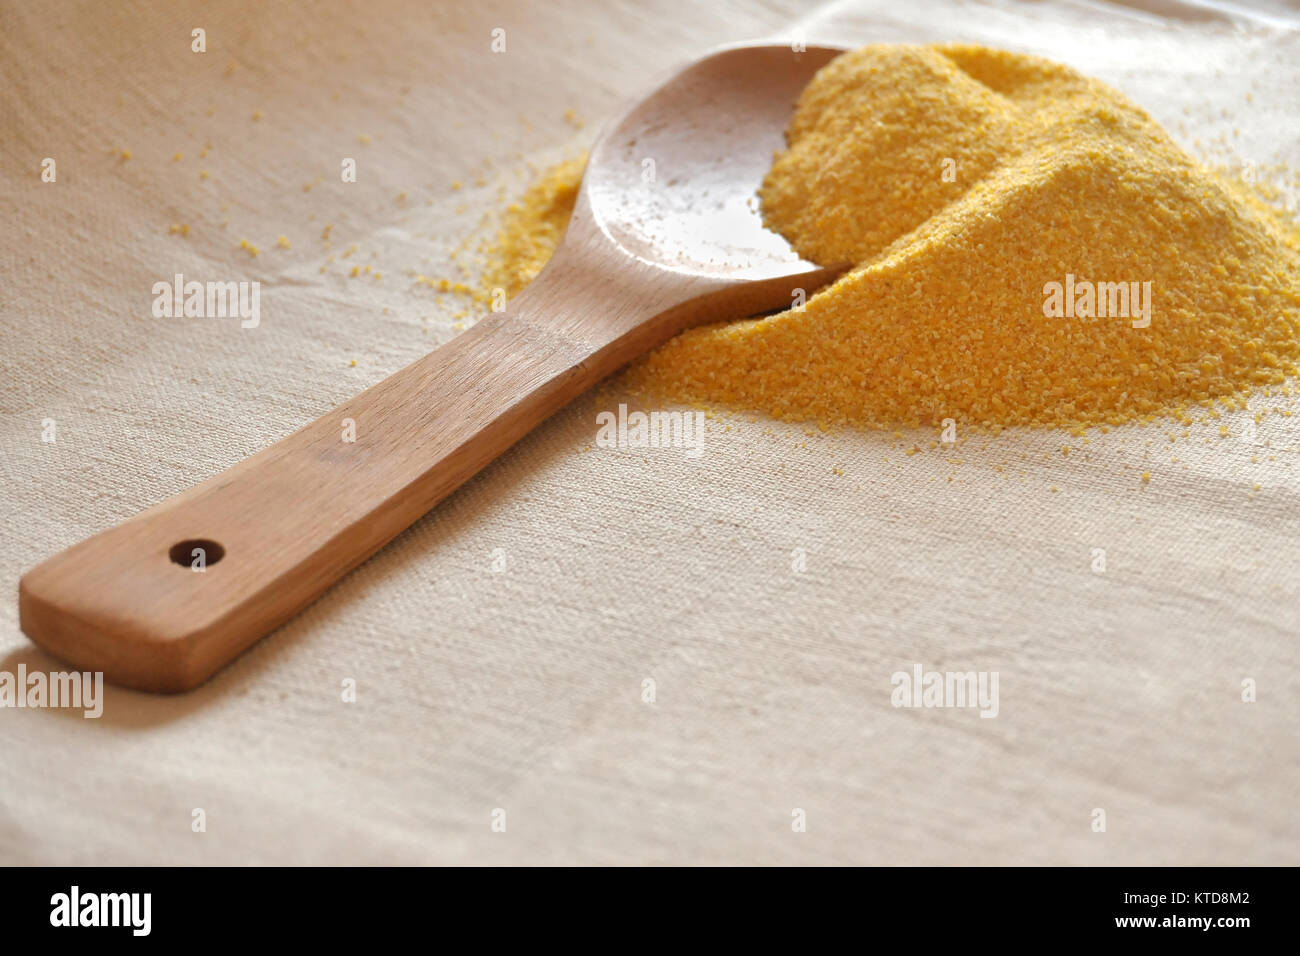 Pile of organic corn grits and a wooden spoon on coarse cloth. Prepared ingredient for cooking. Stock Photo